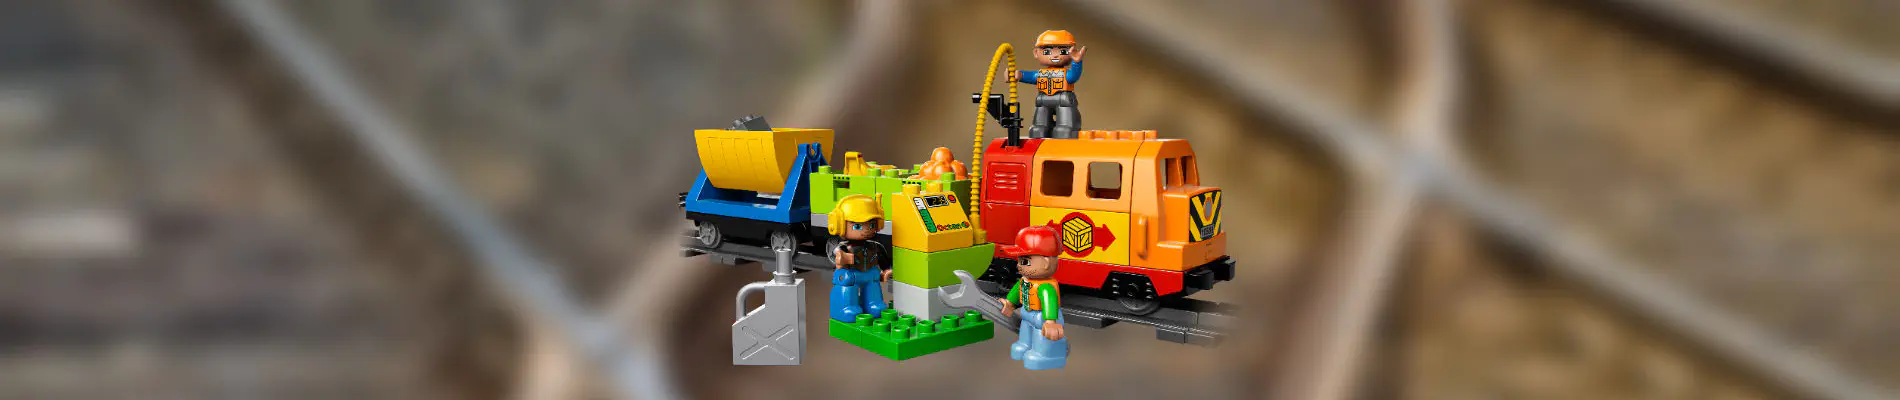 Repairing a Lego Duplo train engine from Delux train set